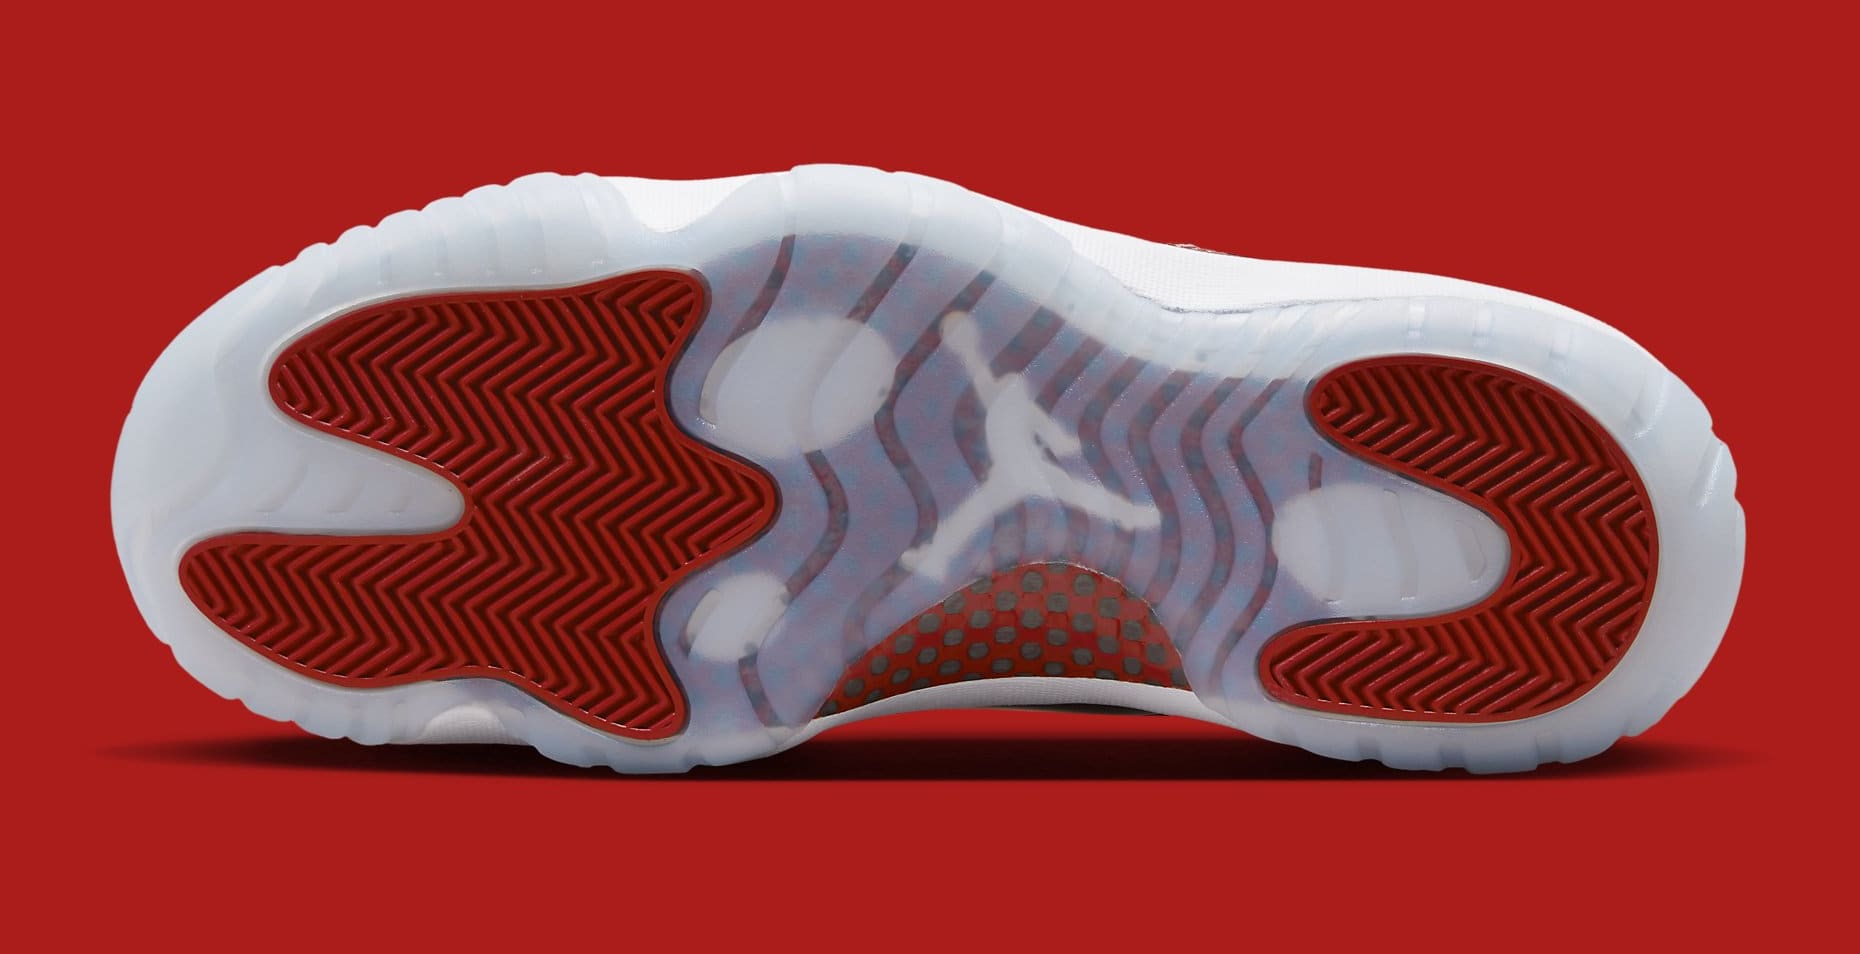 Air Jordan 11 'Varsity Red' CT8012 116 Outsole